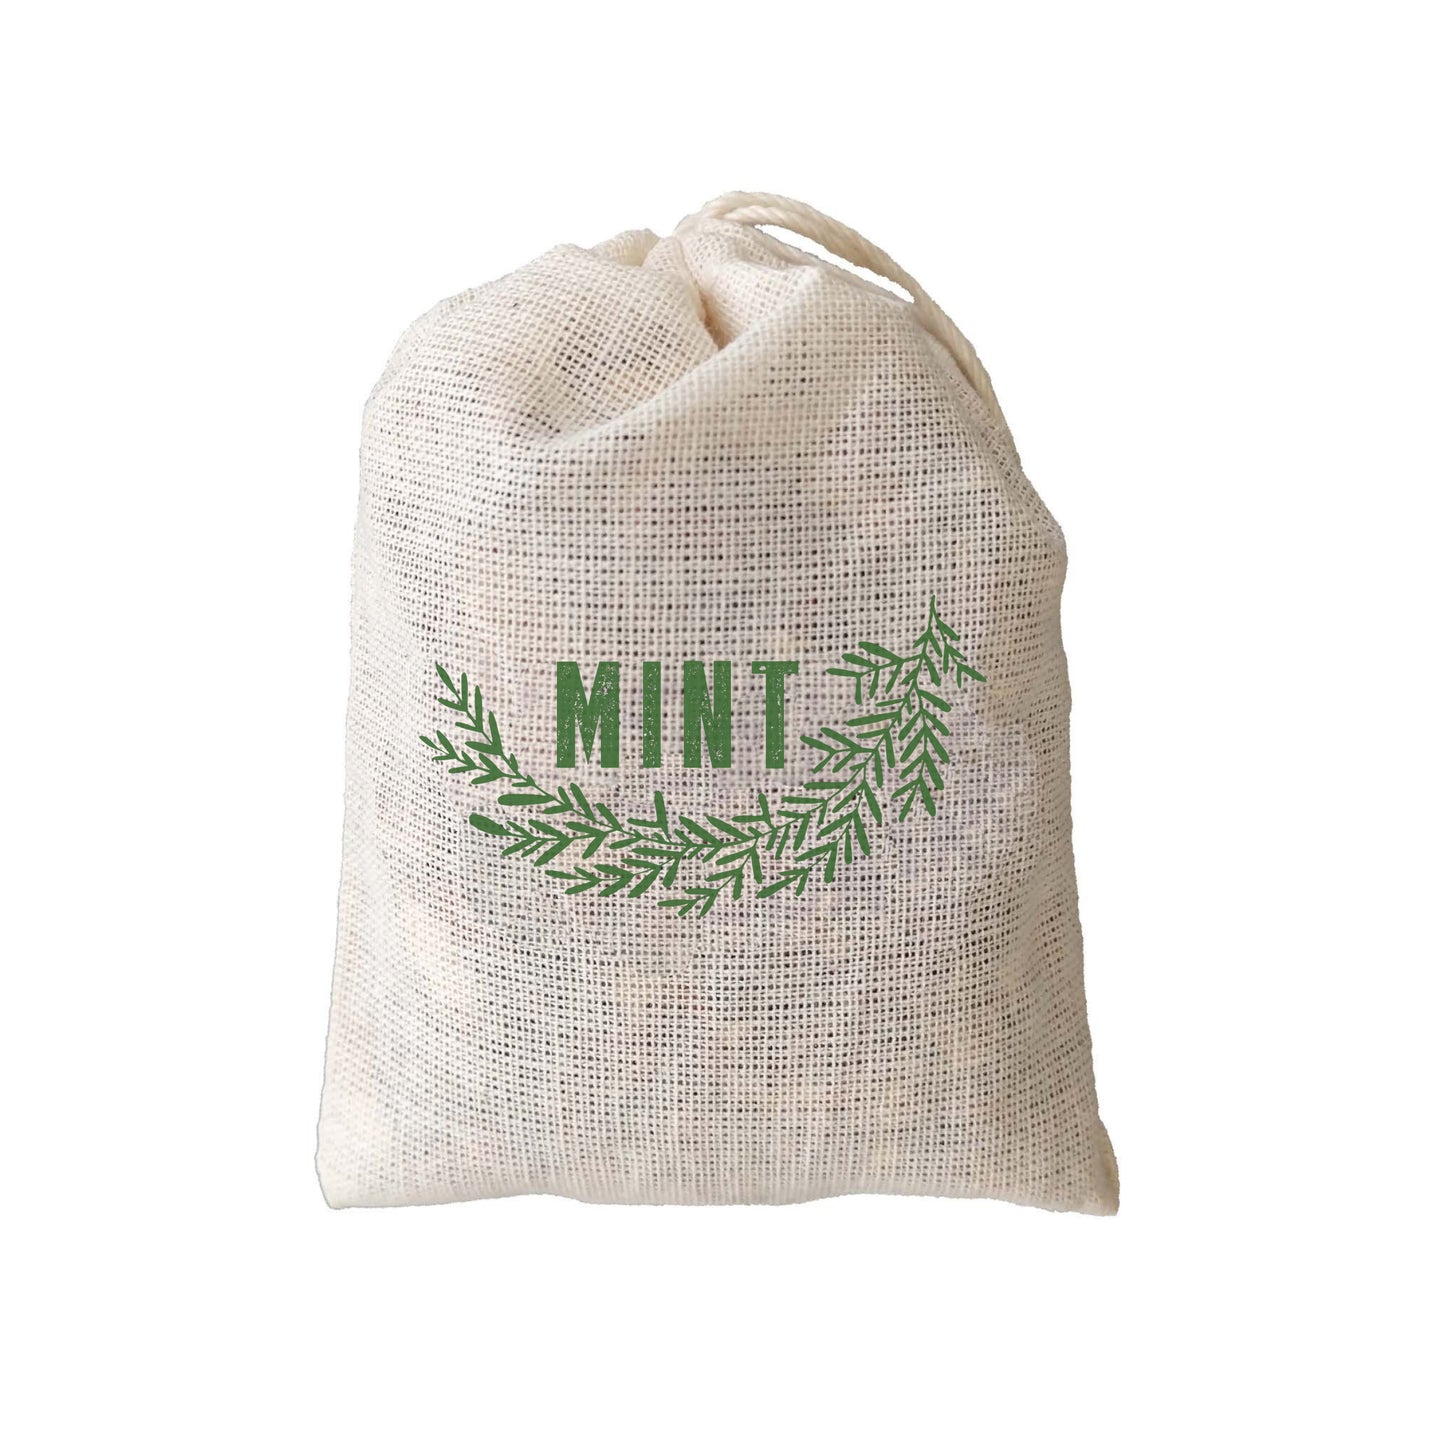 Mint Sachet - 3 Pack for Closet, Drawer or Pantry